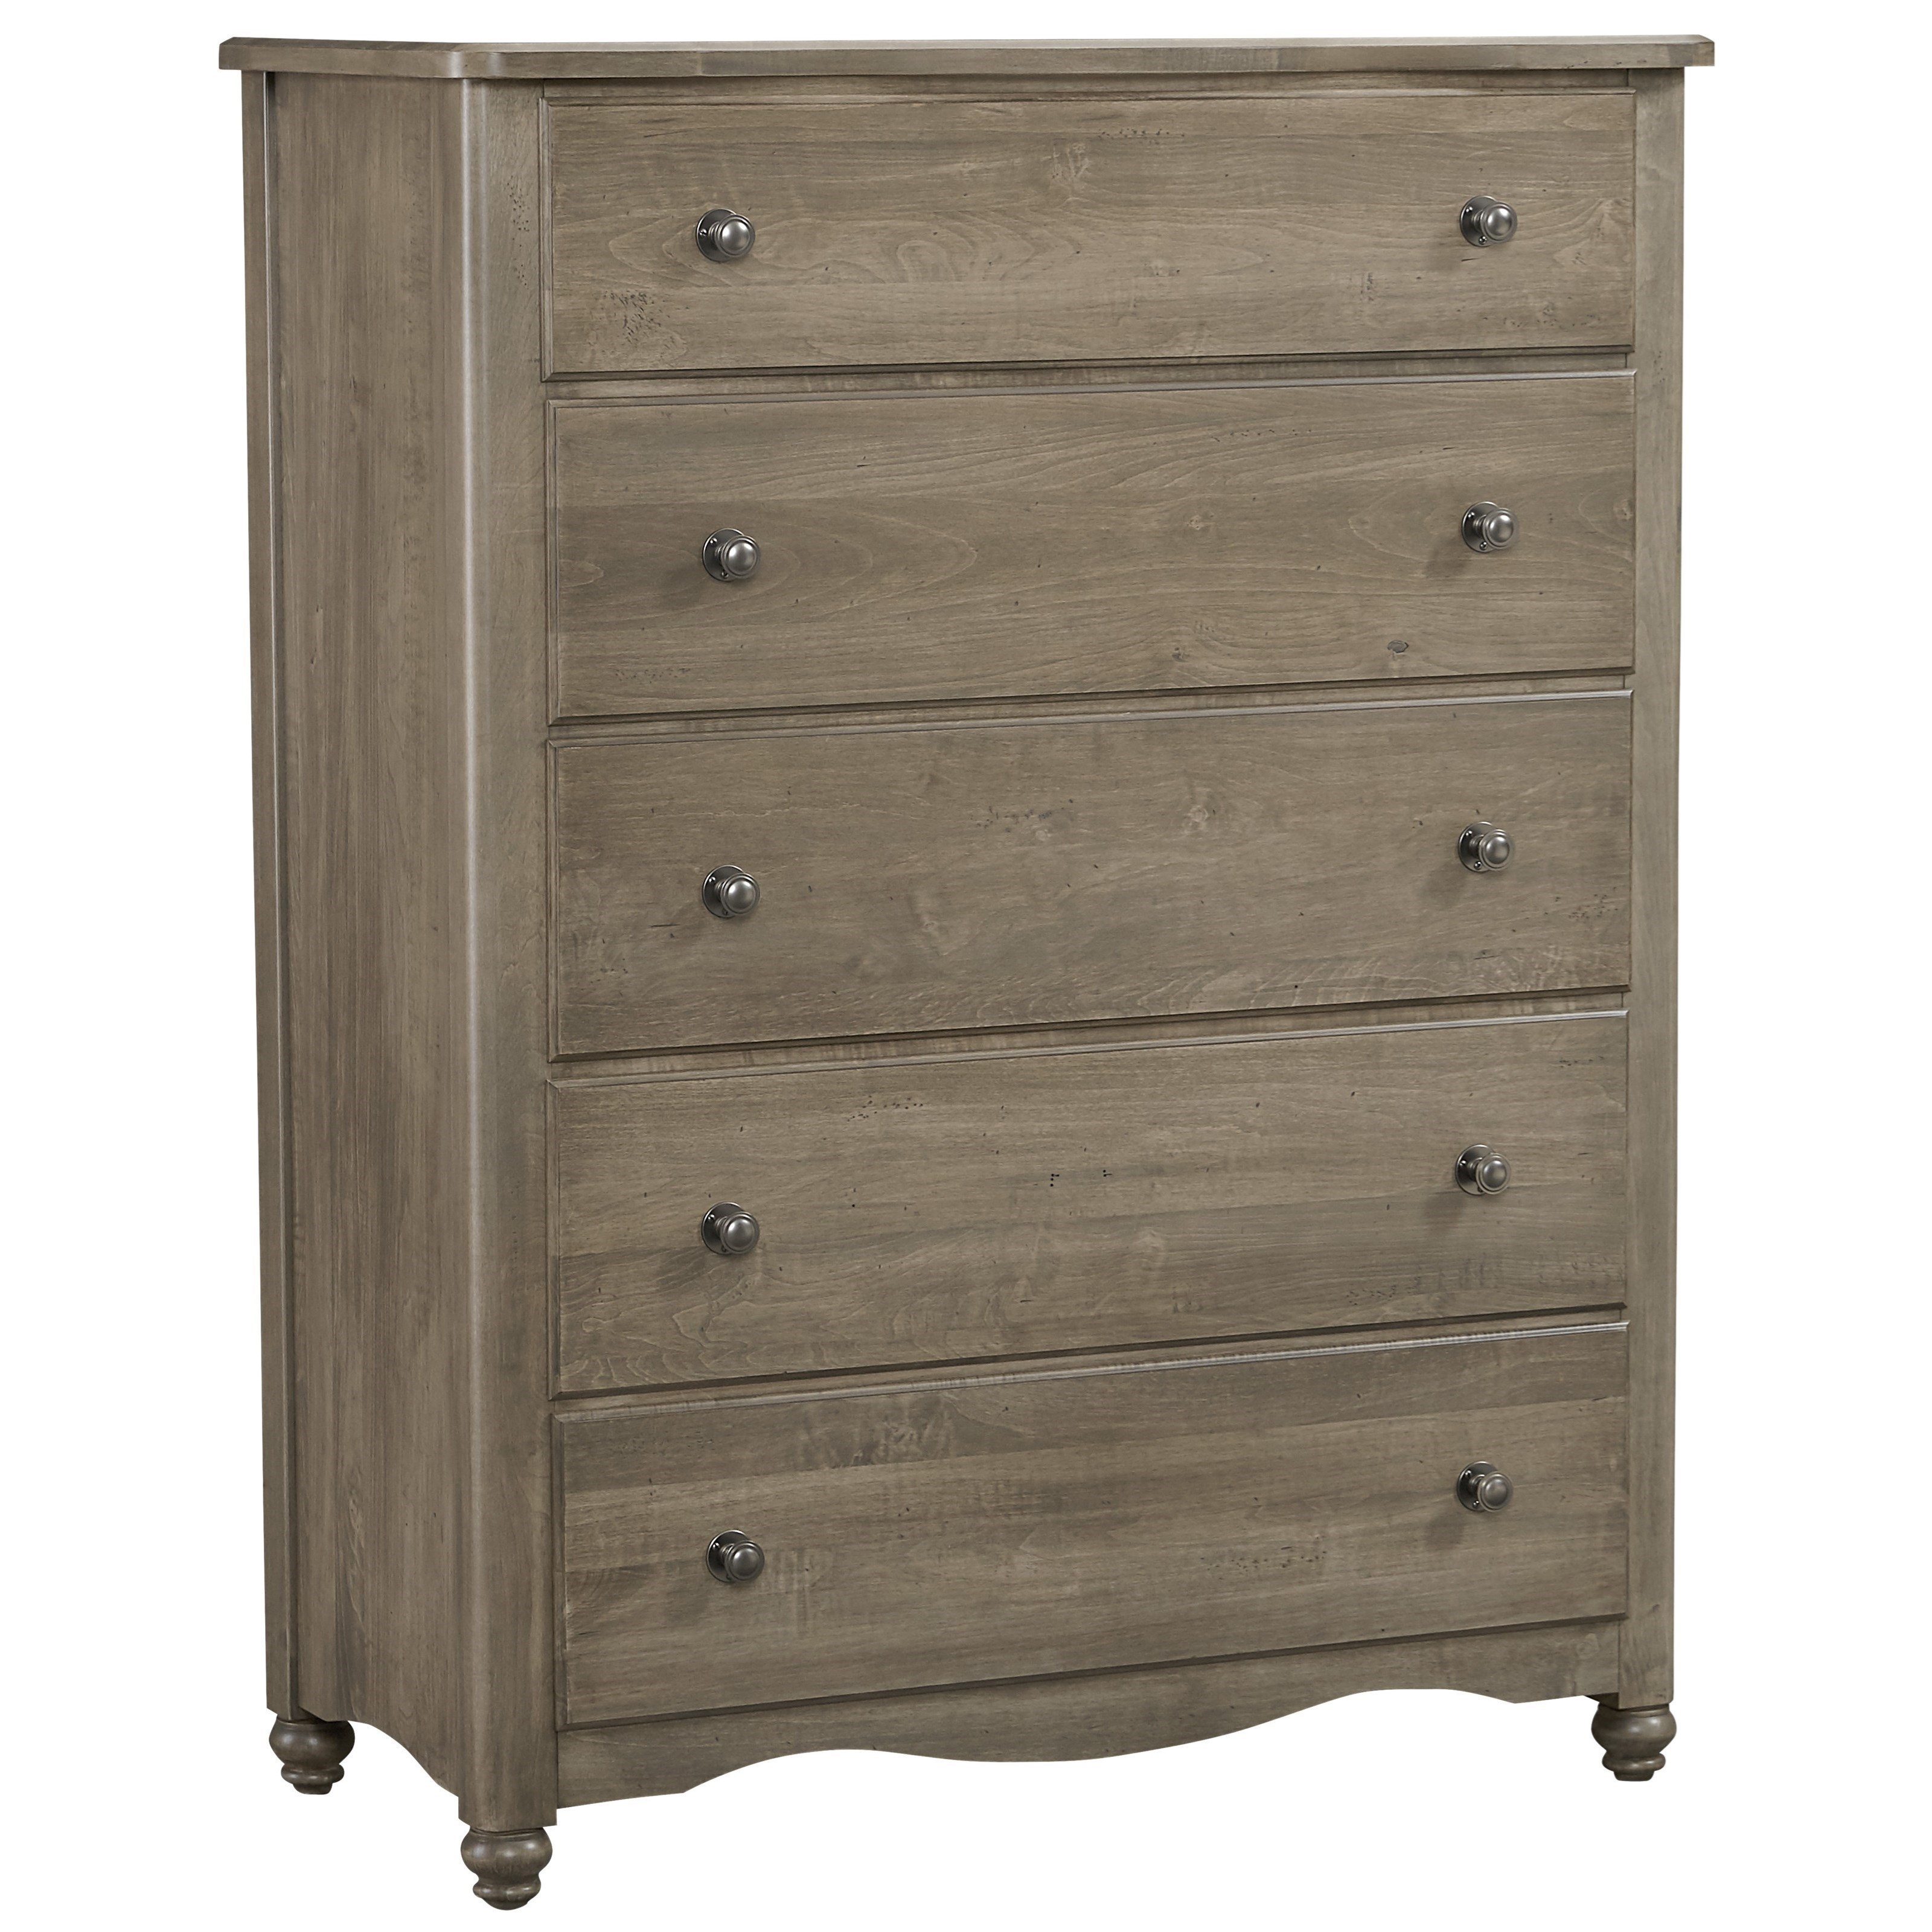 Vaughan Bassett American Maple Solid Wood 5 Drawer Chest | Lindy's